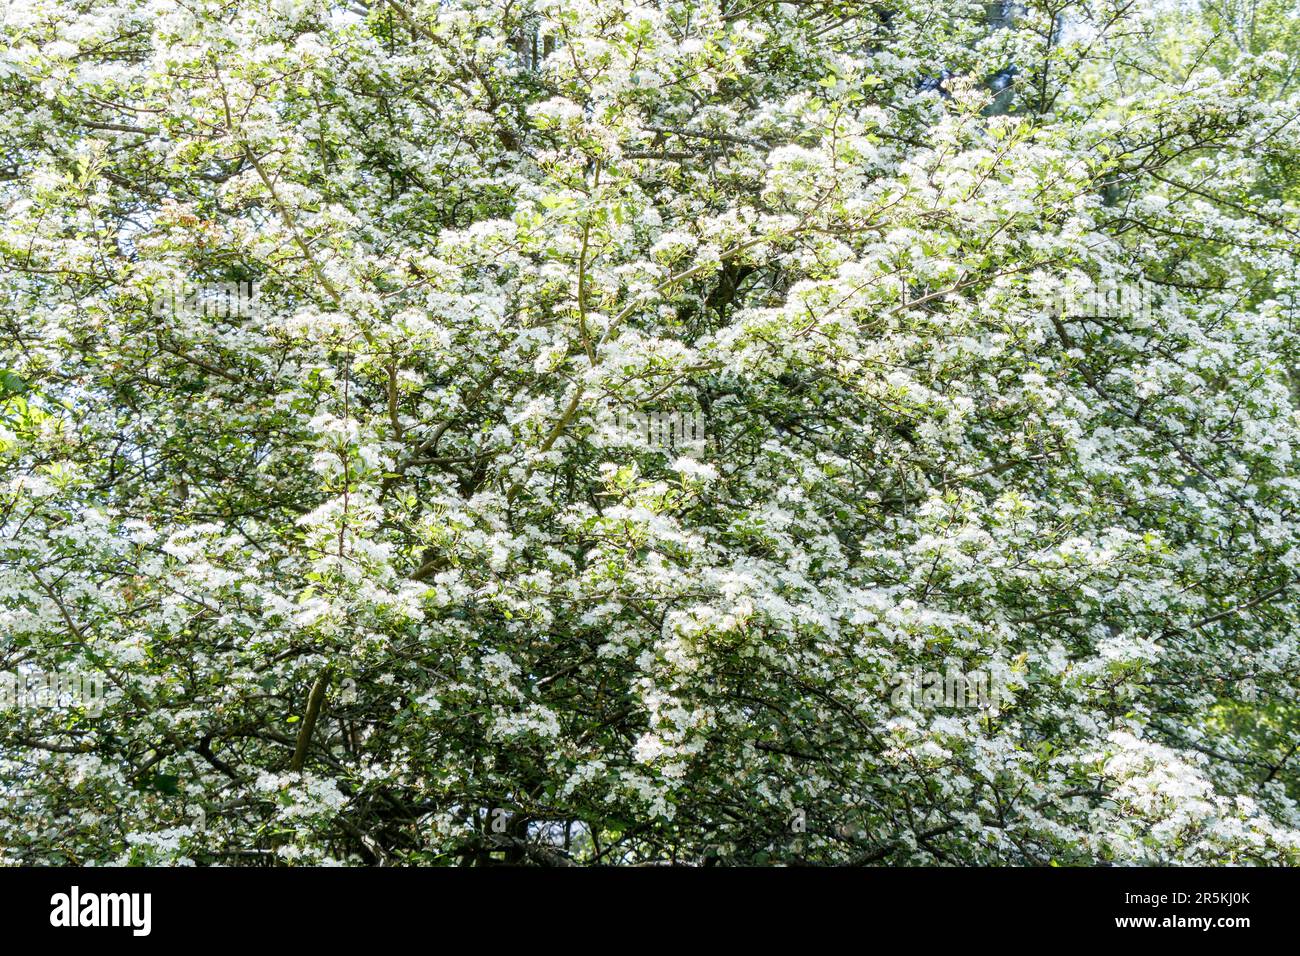 A hawthorn tree in full bloom in May, London, UK Stock Photo